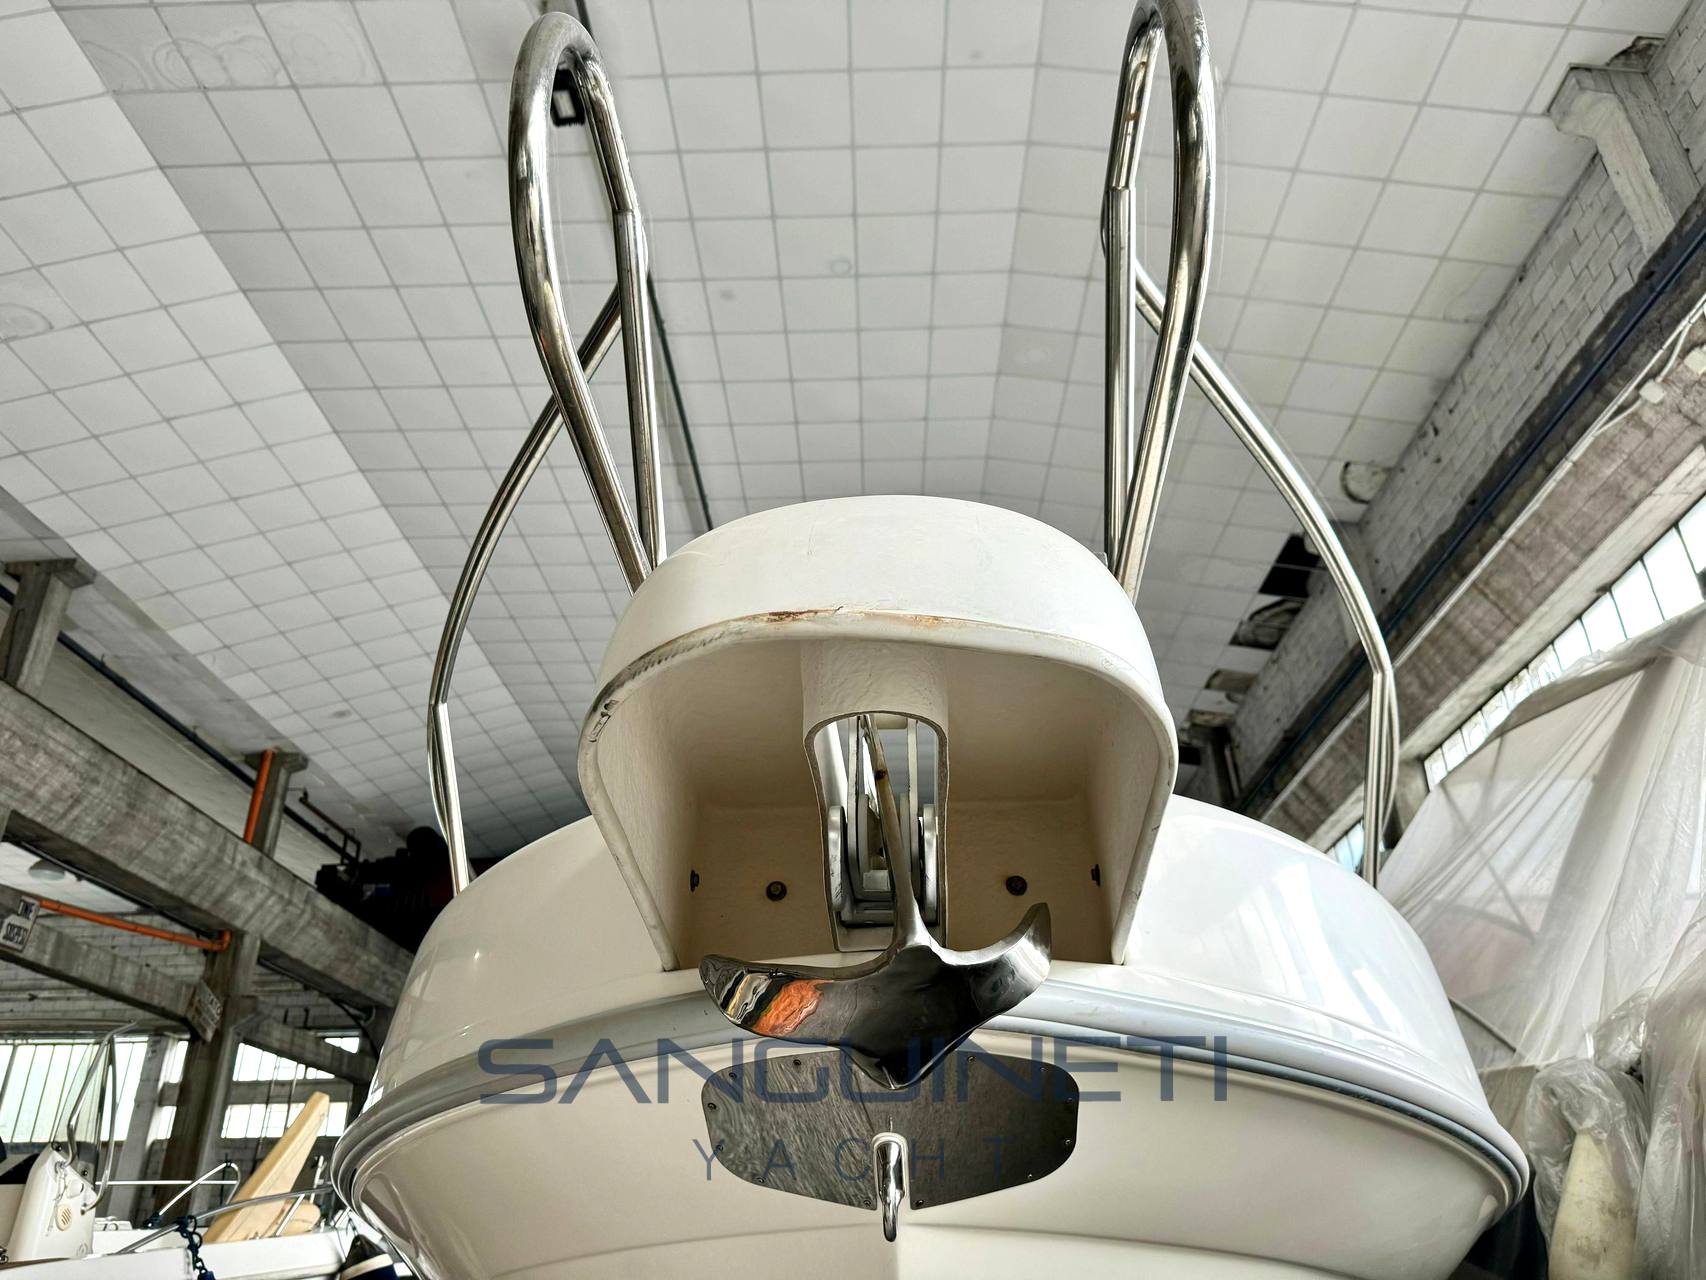 Capelli 27 Motor boat used for sale